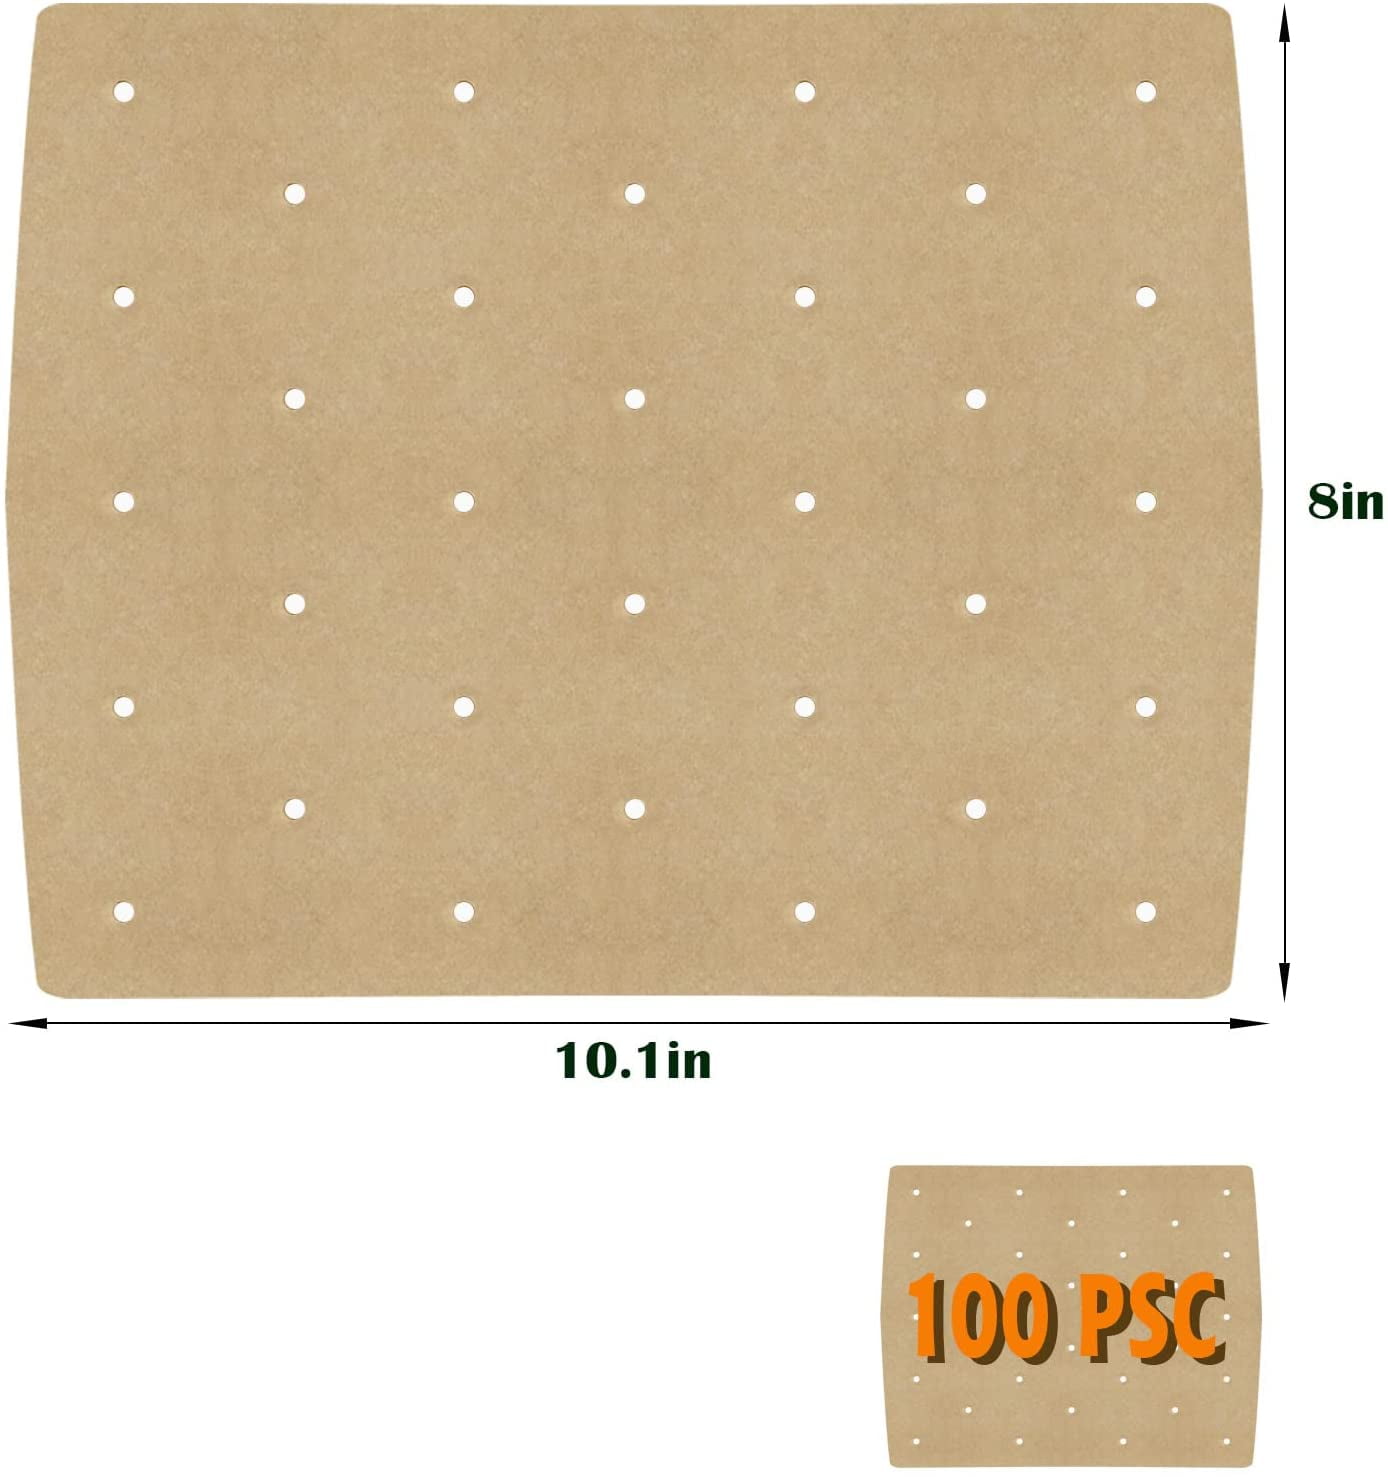 Unbleached Air Fryer Parchment Paper, 100 Pcs Perforated Square Air Fryer Liners for Ninja Foodi Grill 5-in-1 Ag301 4qt Air Fryer, Square Air Fryer